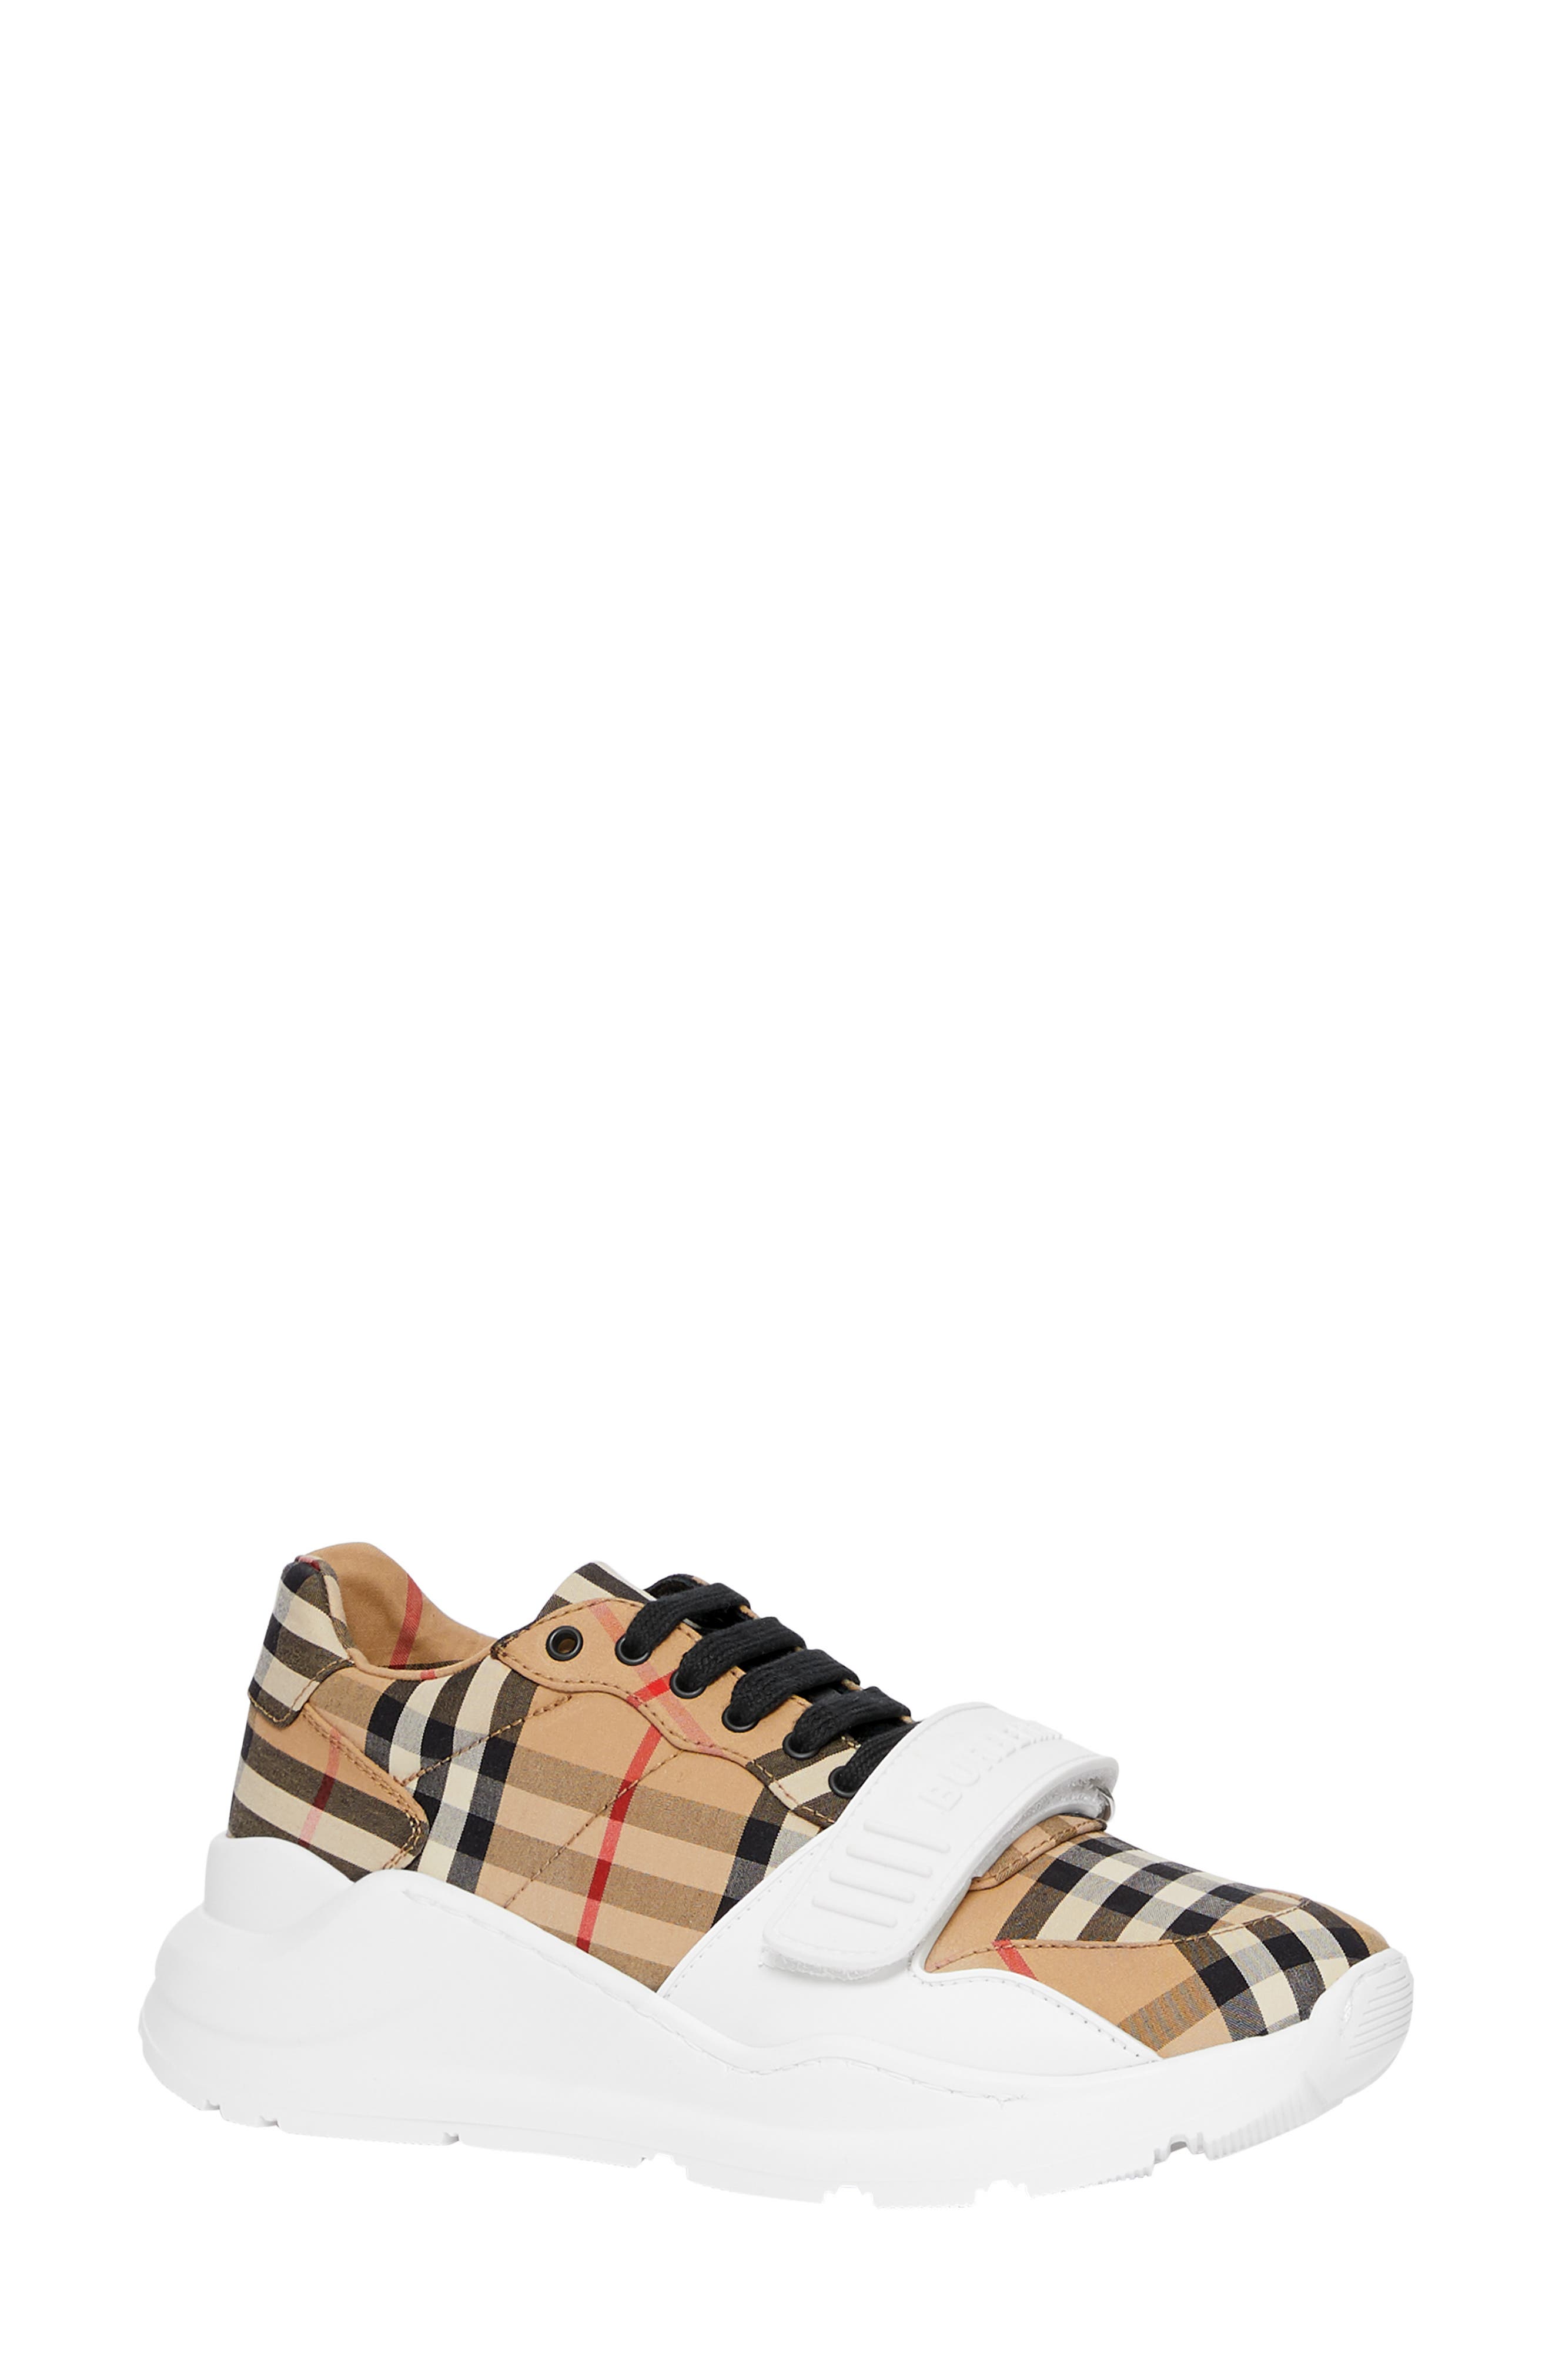 burberry shoes womens nordstrom